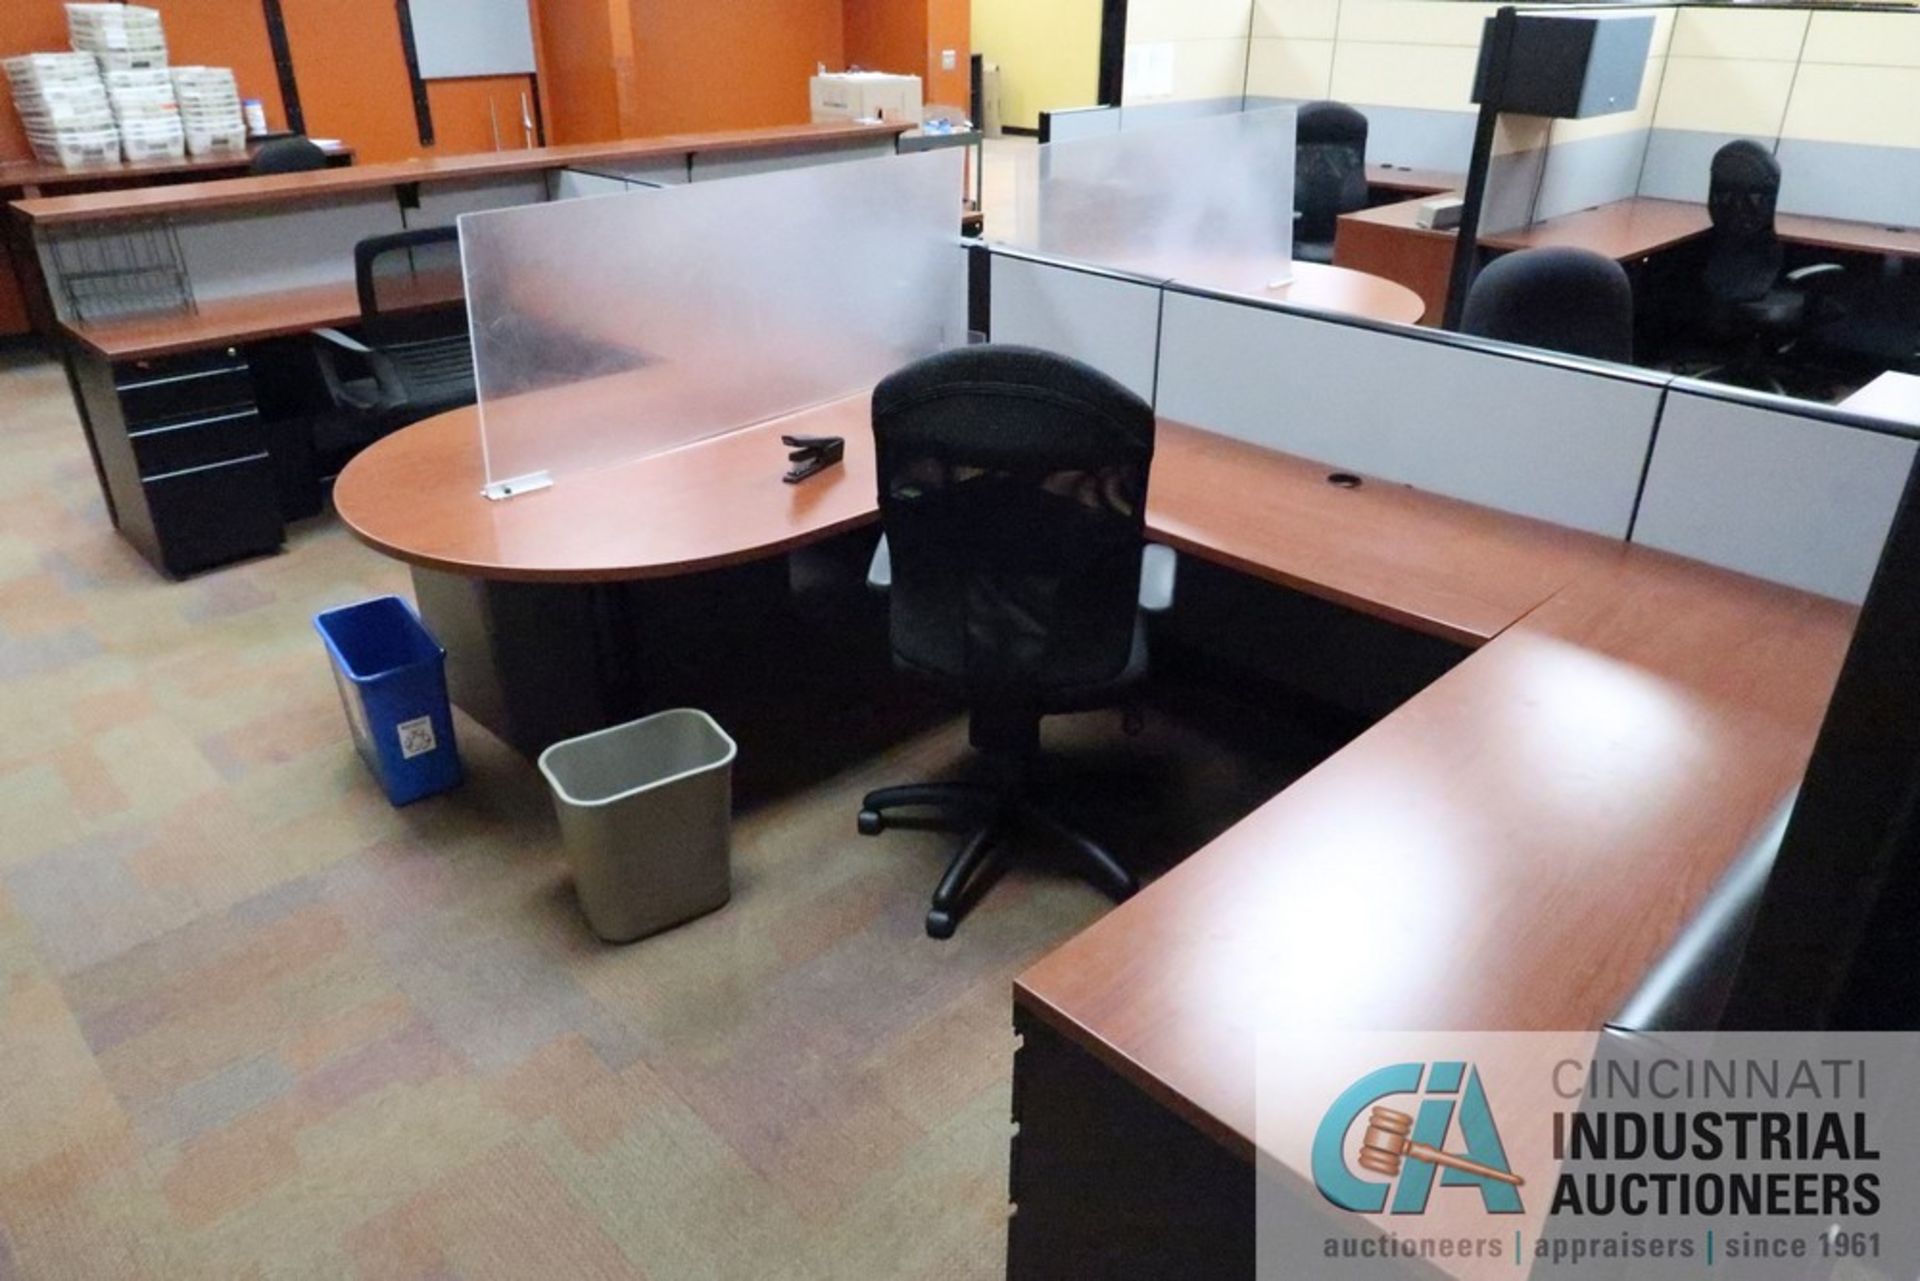 PERSON 72" X 96" MODULAR OFFICE CUBICLES WITH (4) CHAIRS - Image 4 of 4